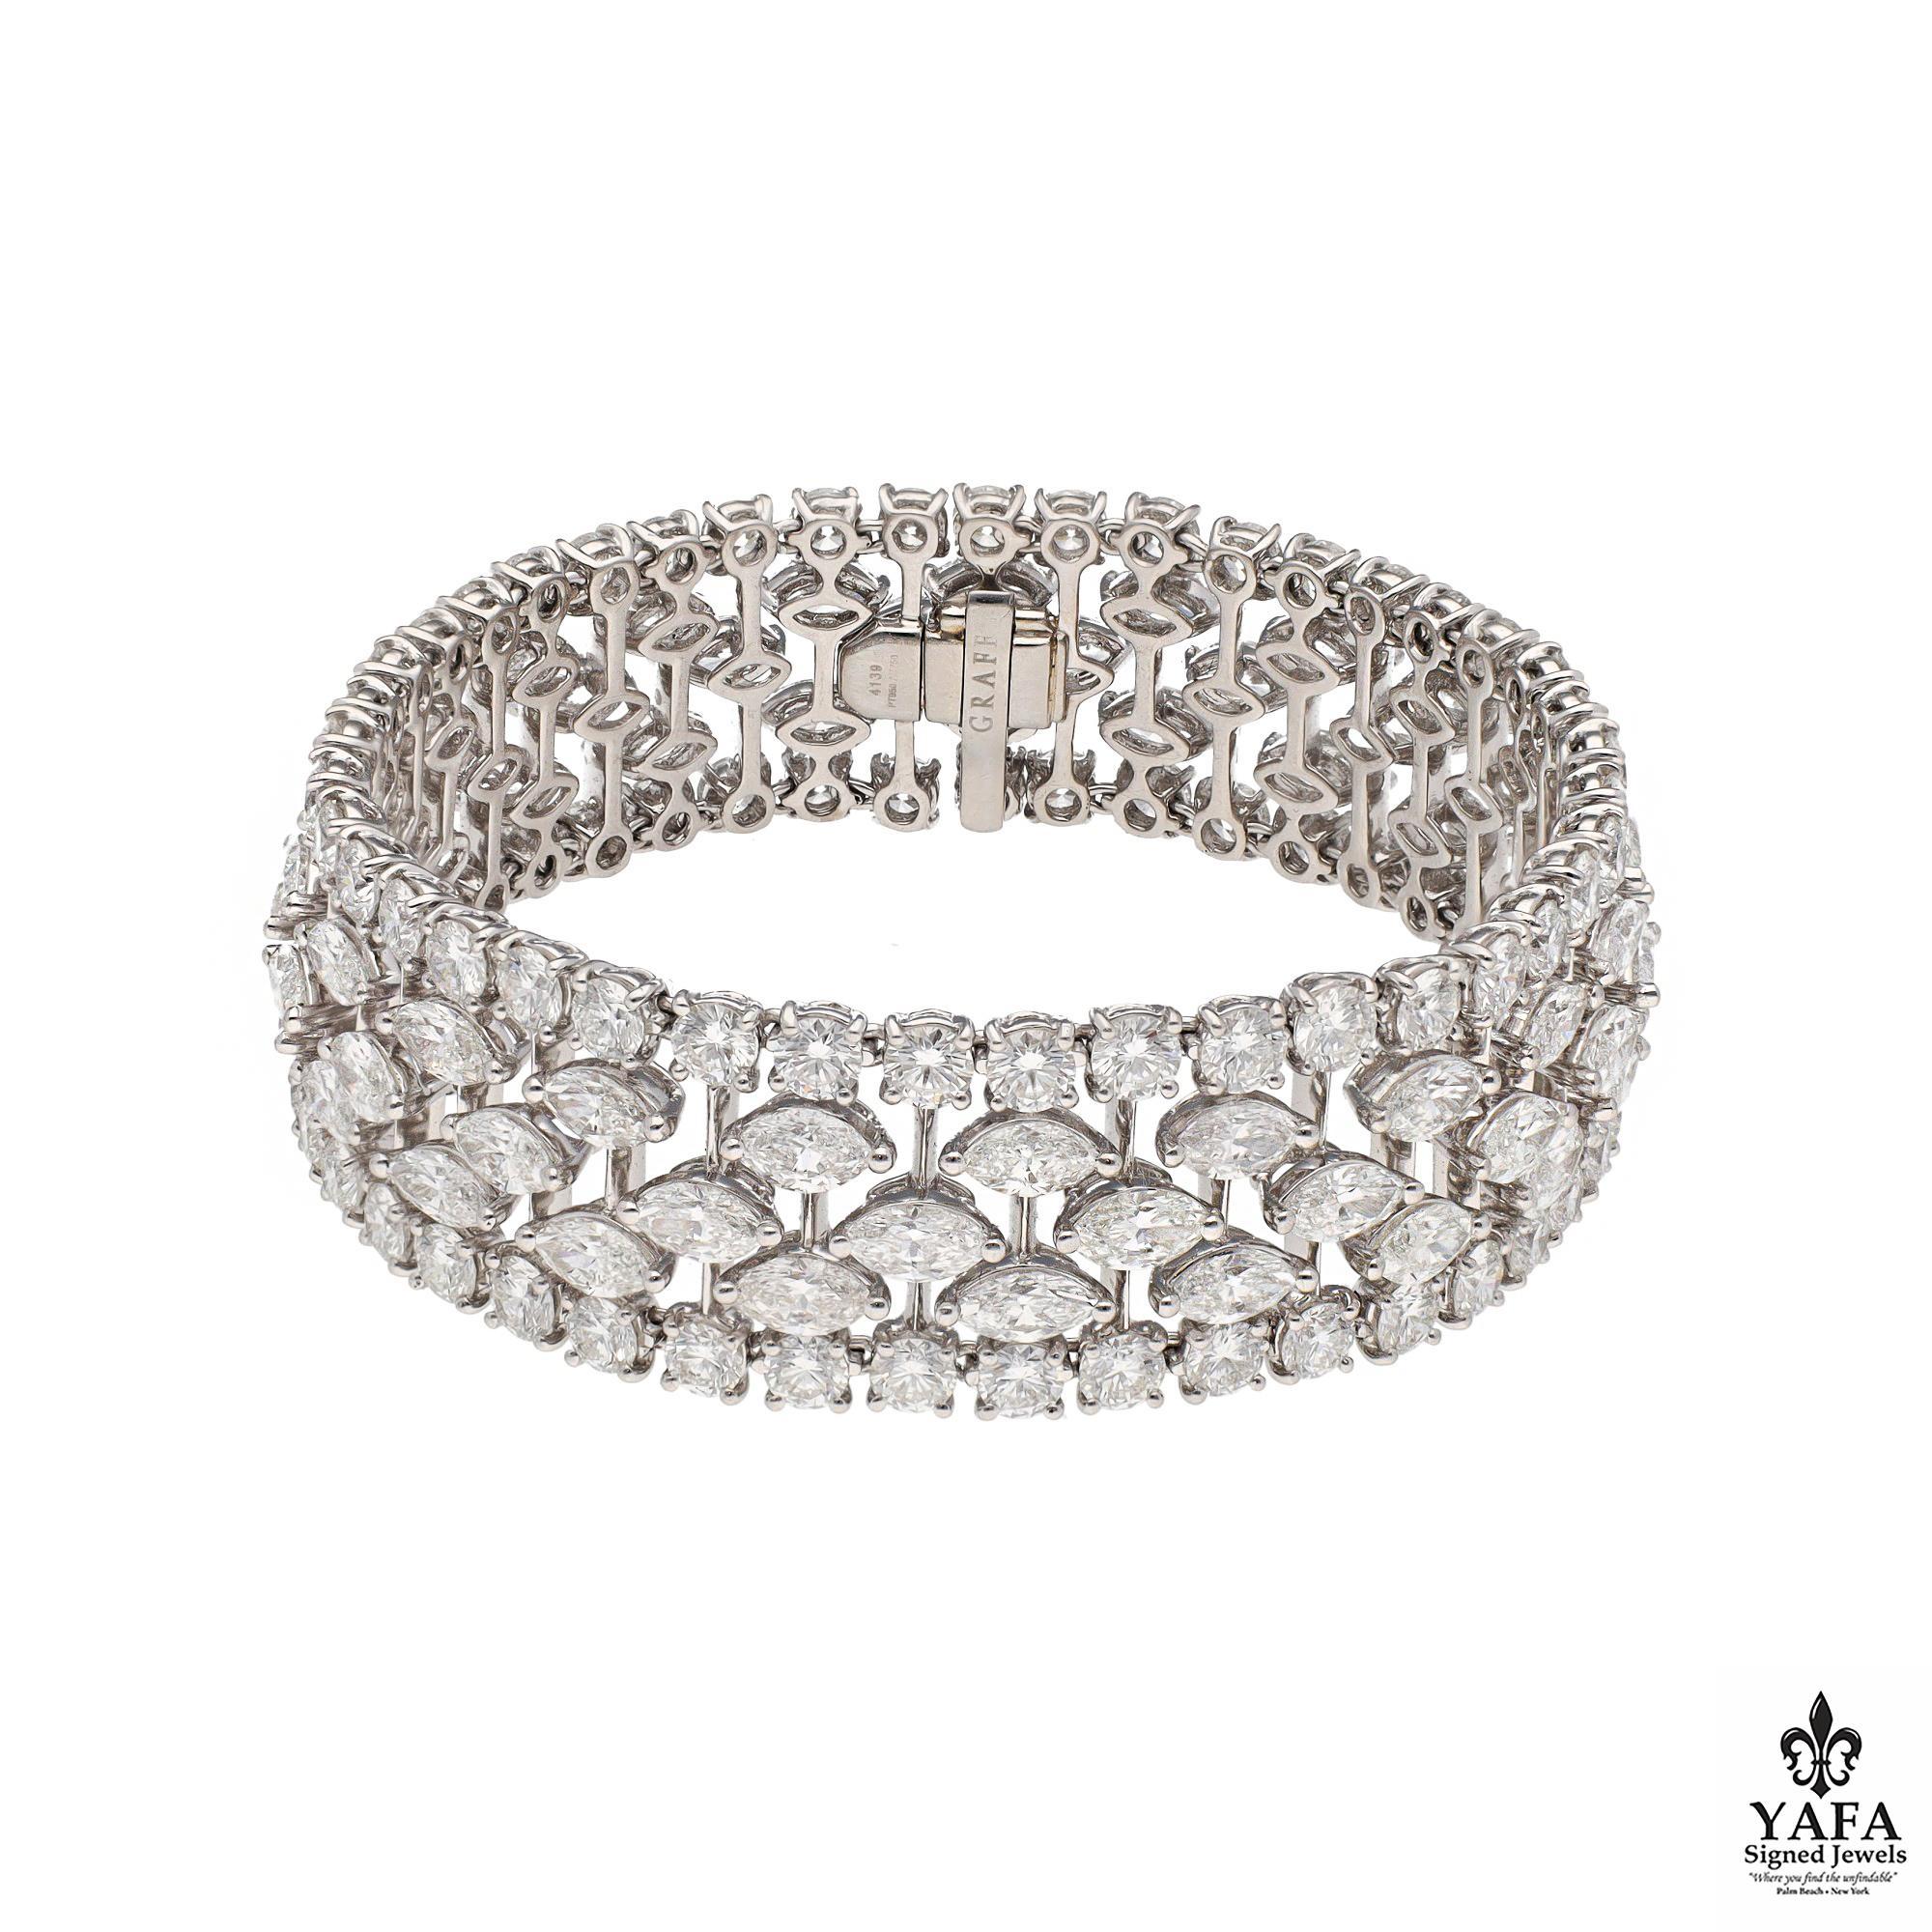 Beautifully designed classic Graff bracelet that celebrates the purity of classic diamonds.  
3-Rows of 86 Marquise Diamonds, 84 Round Diamonds. 
Approx. Weight 36.15 CTS
Approx. Total Diamond Weight 52.4 CTS
Approx. length 7.25